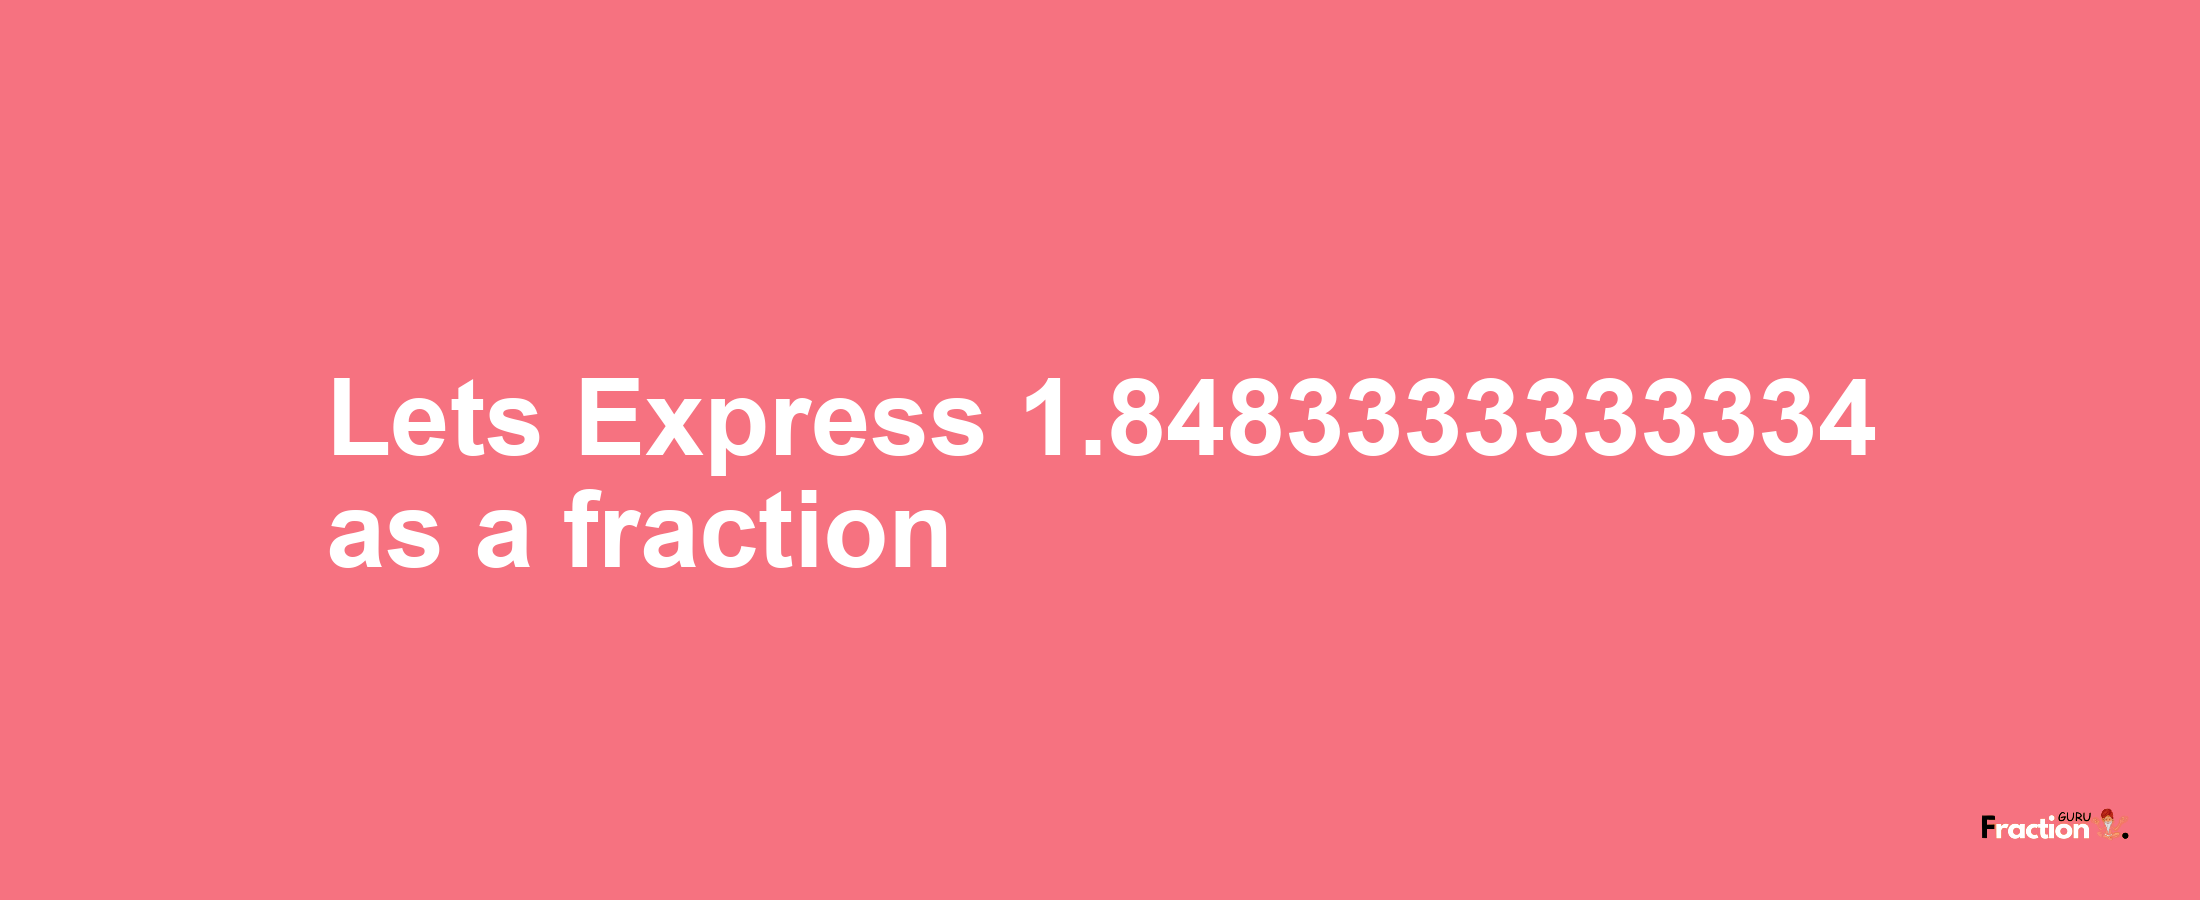 Lets Express 1.8483333333334 as afraction